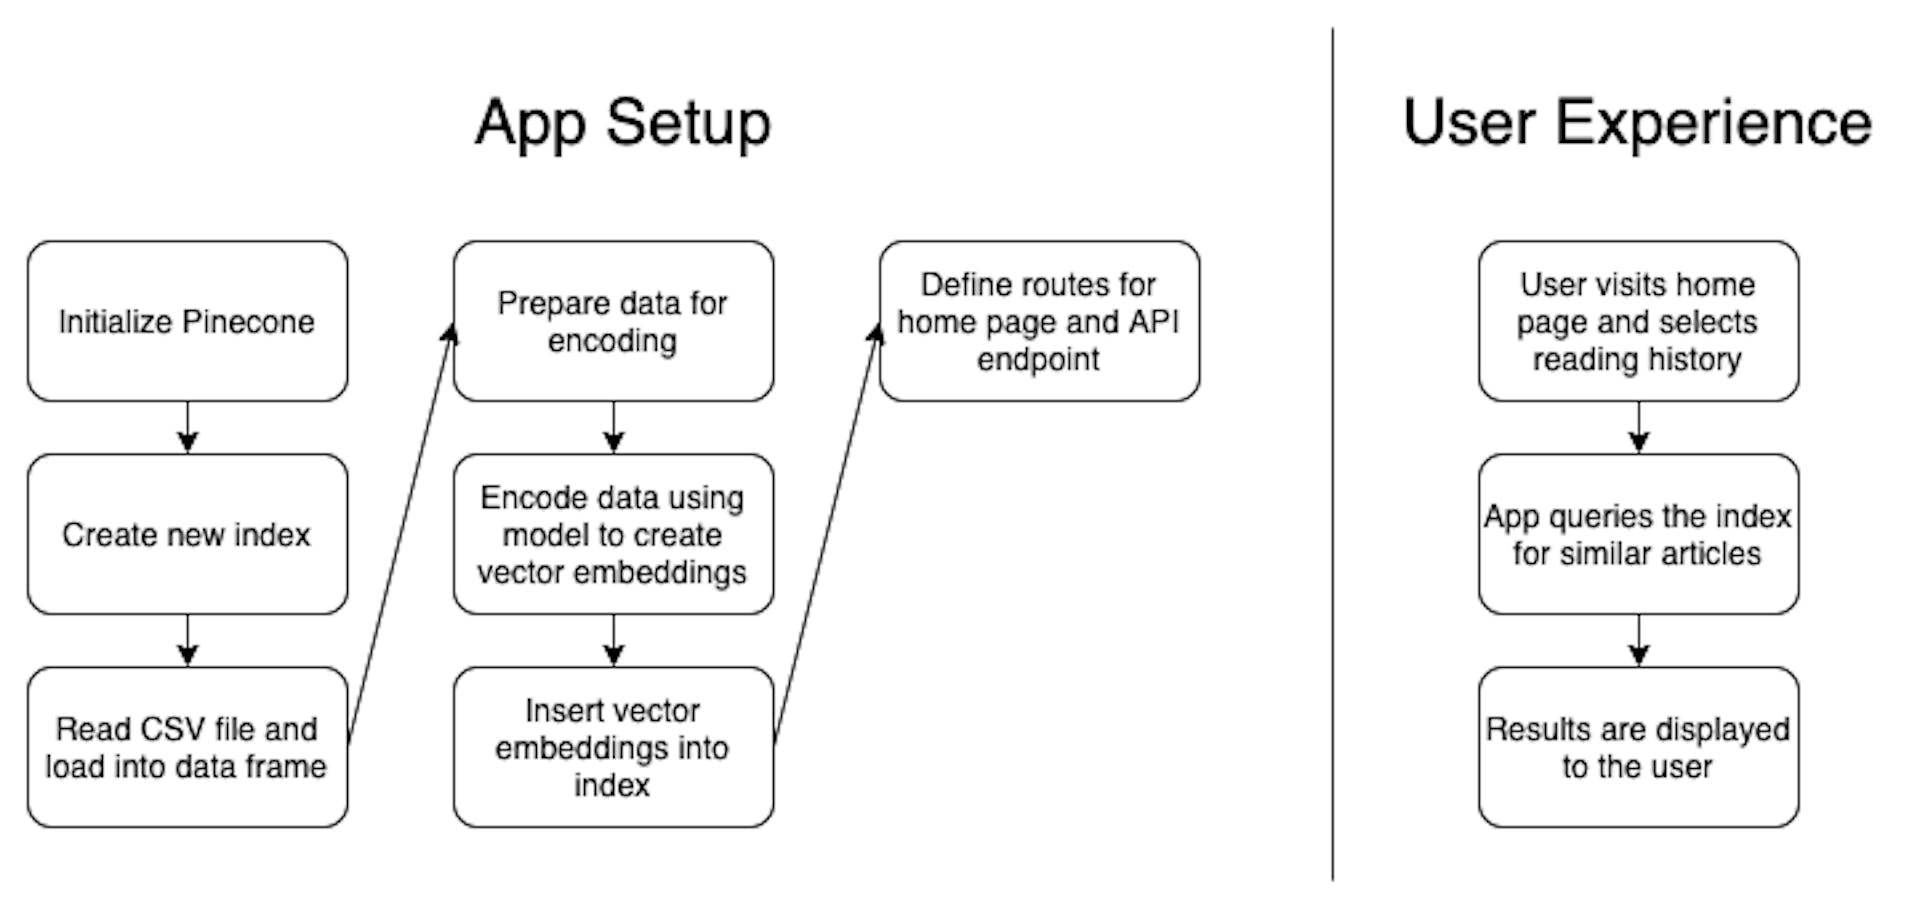 App architecture and user experience